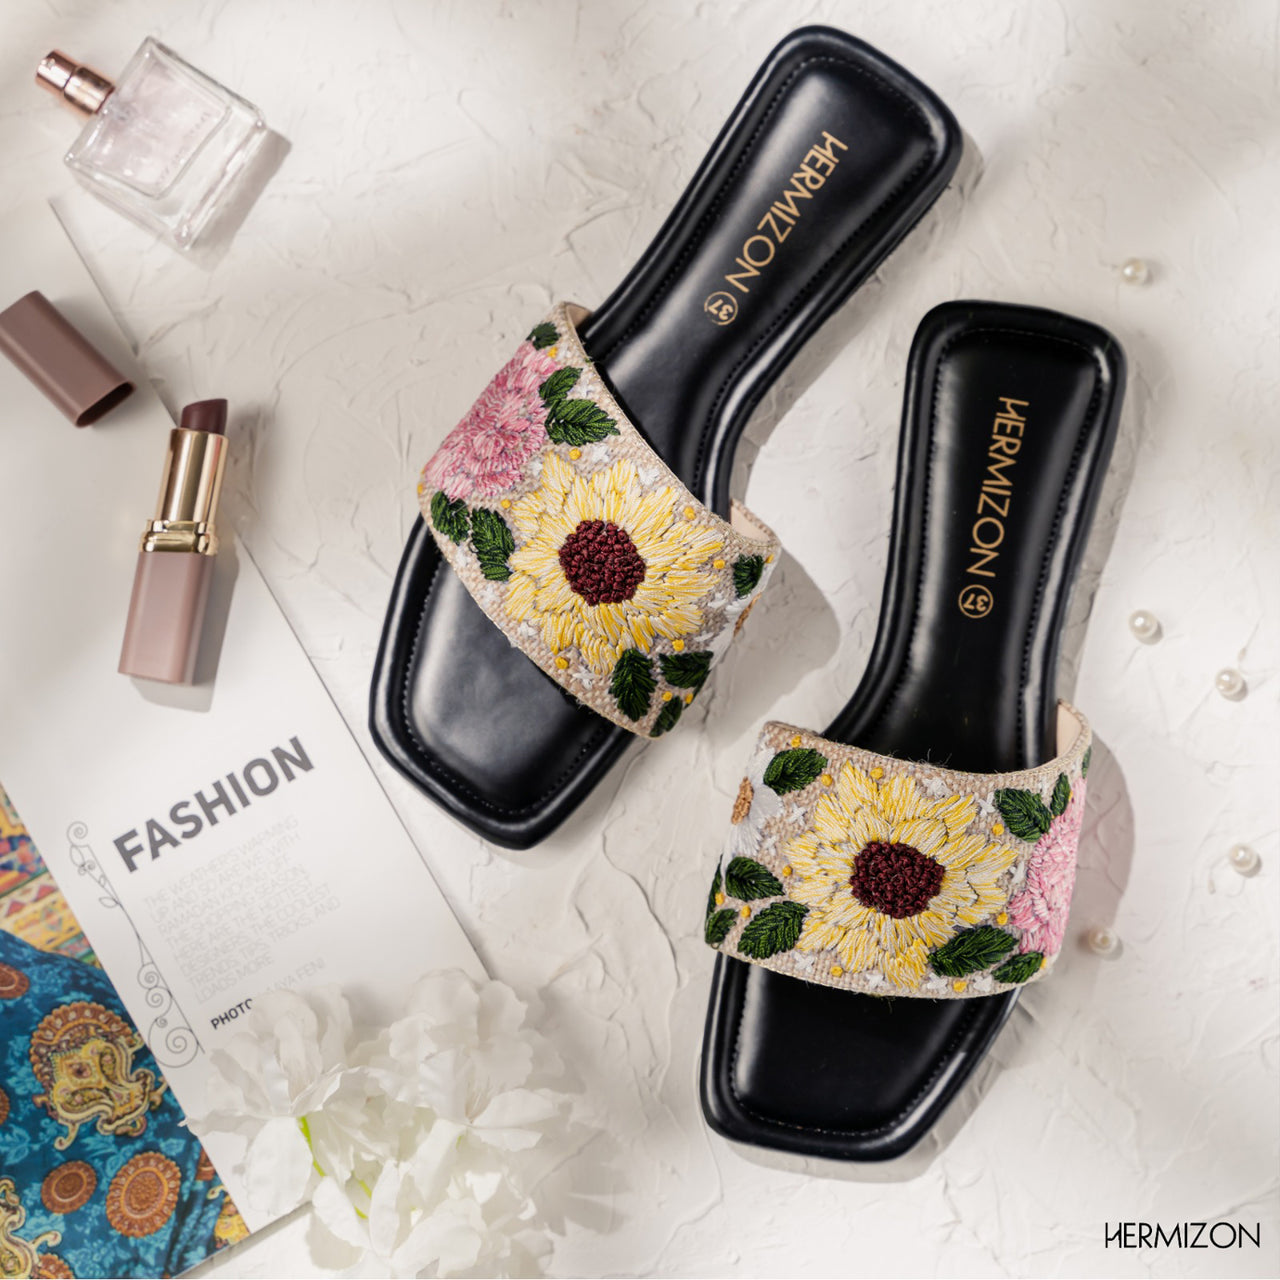 Hermizon brand black color flat sandals with yellow flower on top